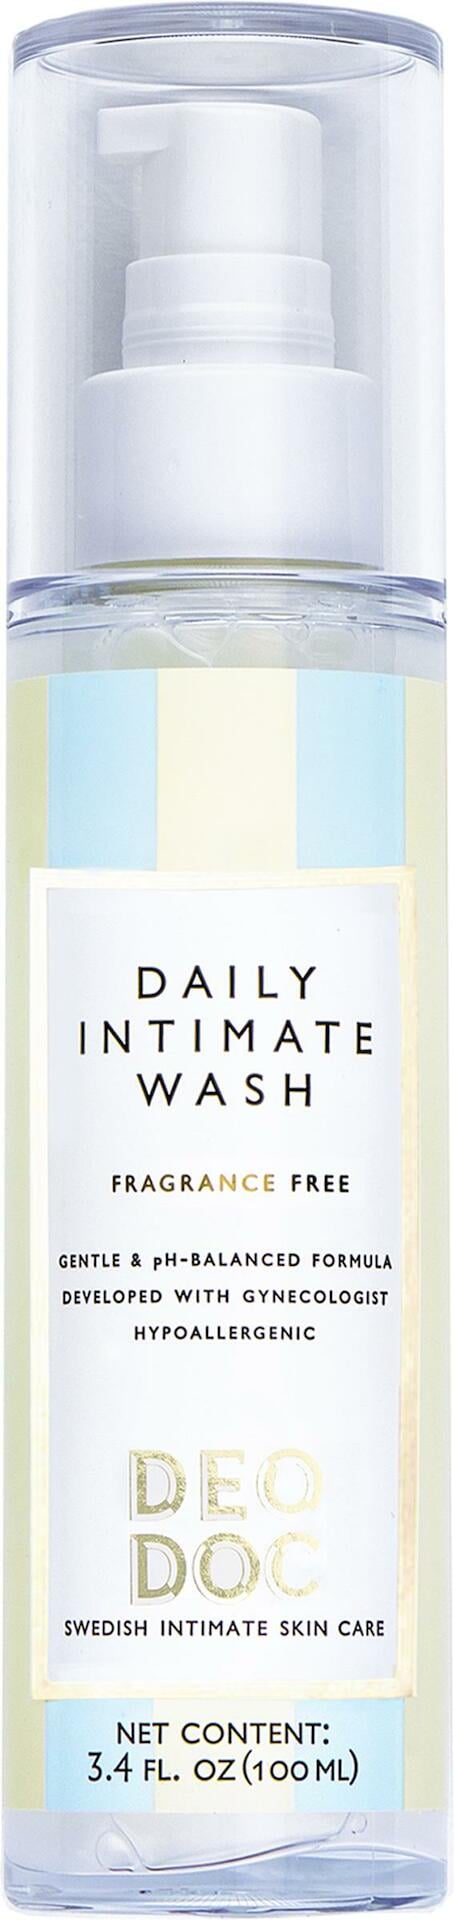 DeoDoc Daily intimate Wash Fragrance Free 100 ml